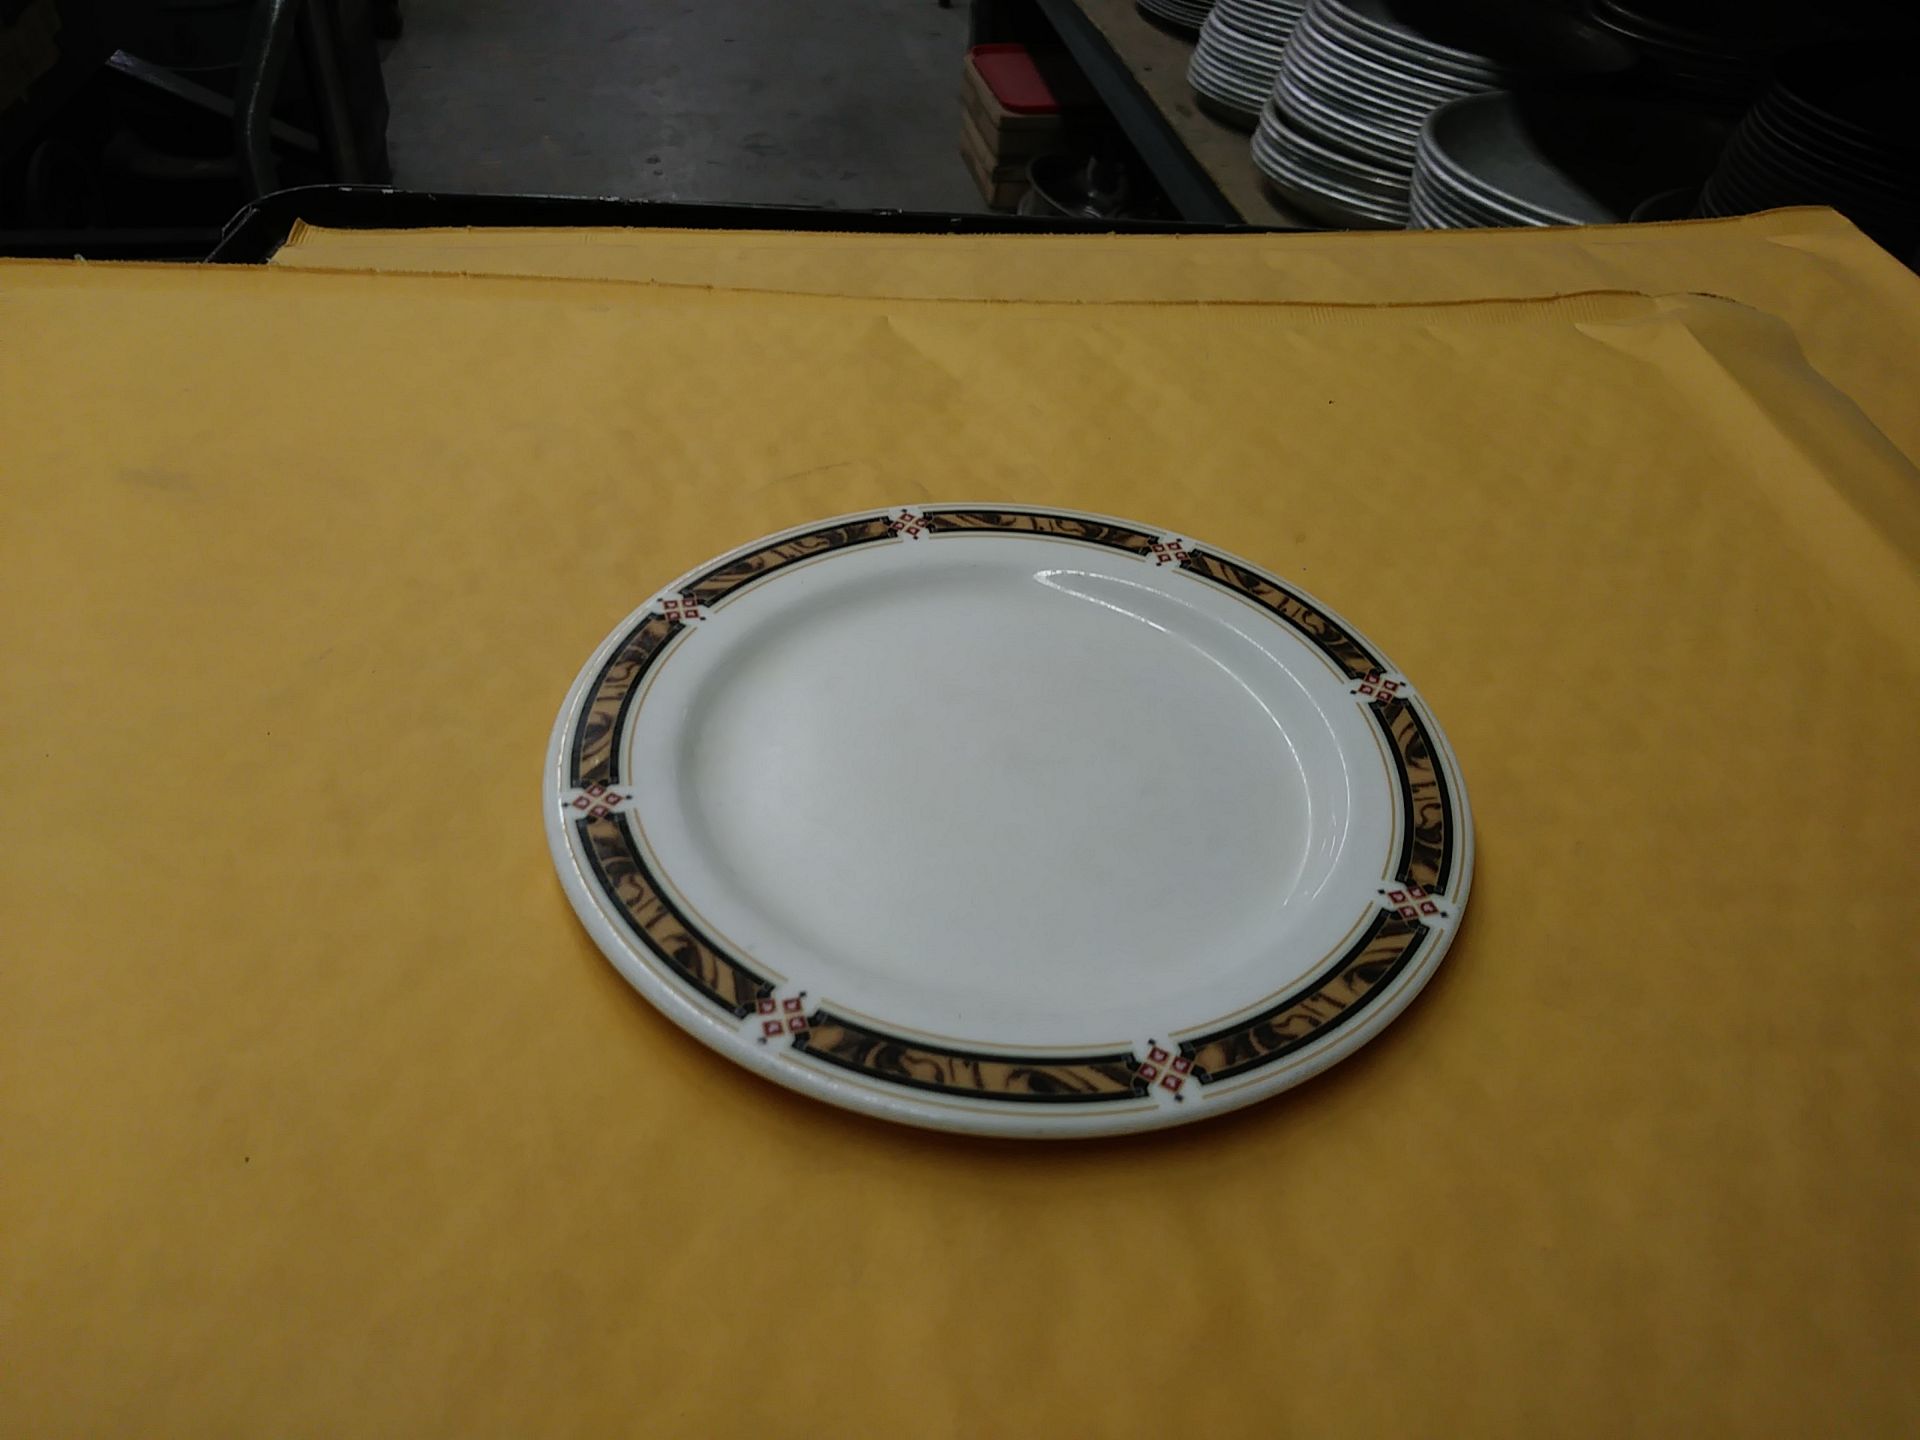 6" STEELITE PLATE (includes QTY 55 in this lot)